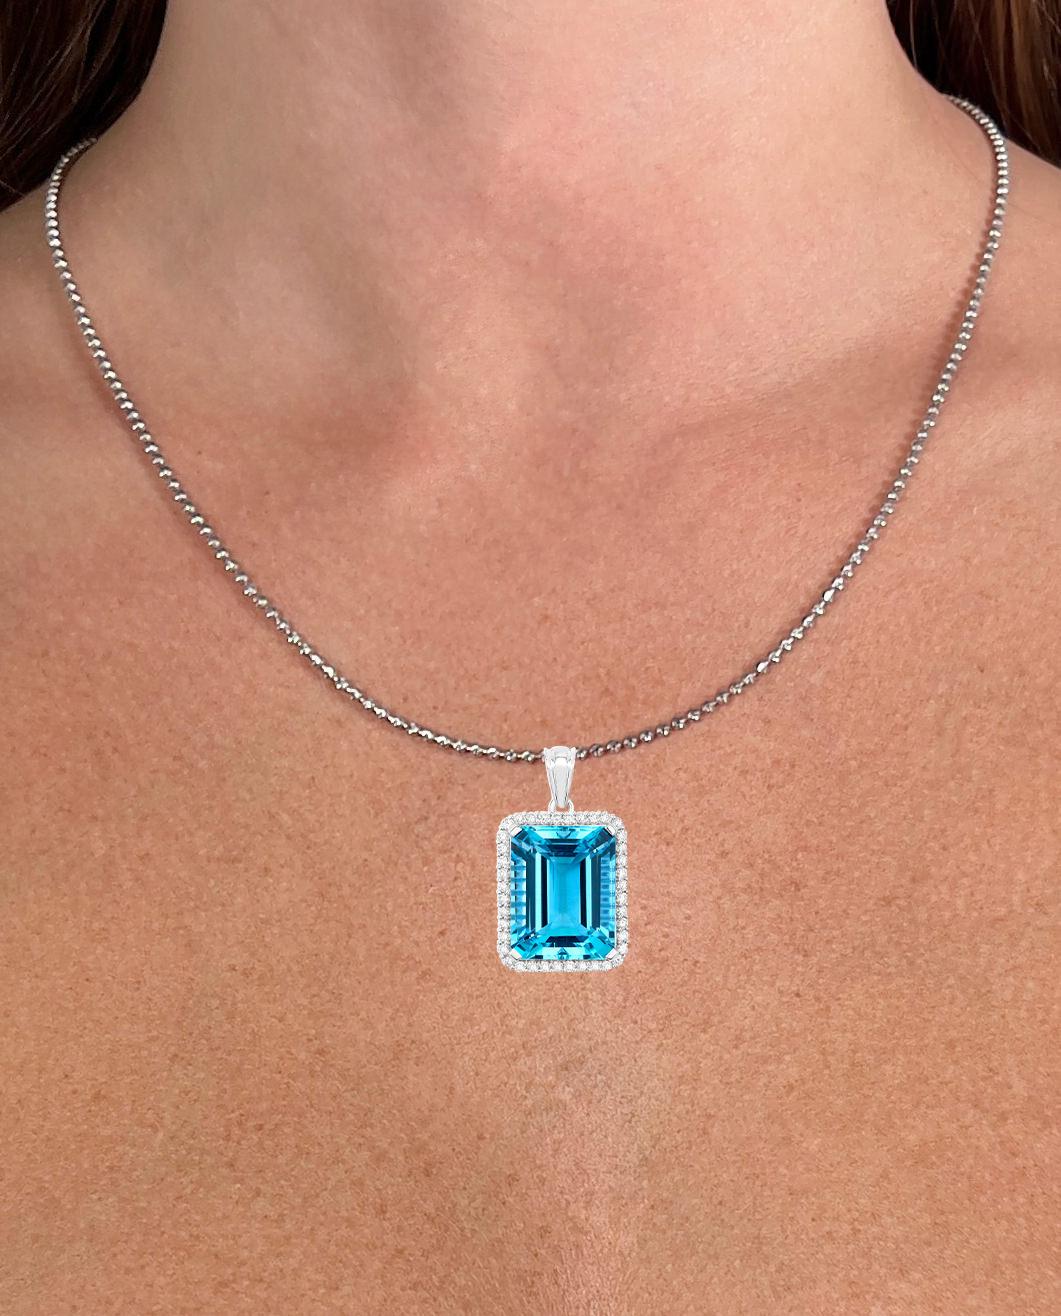 Contemporary Important Aquamarine Pendant Necklace With Diamonds 17.8 Carats 14K Gold For Sale